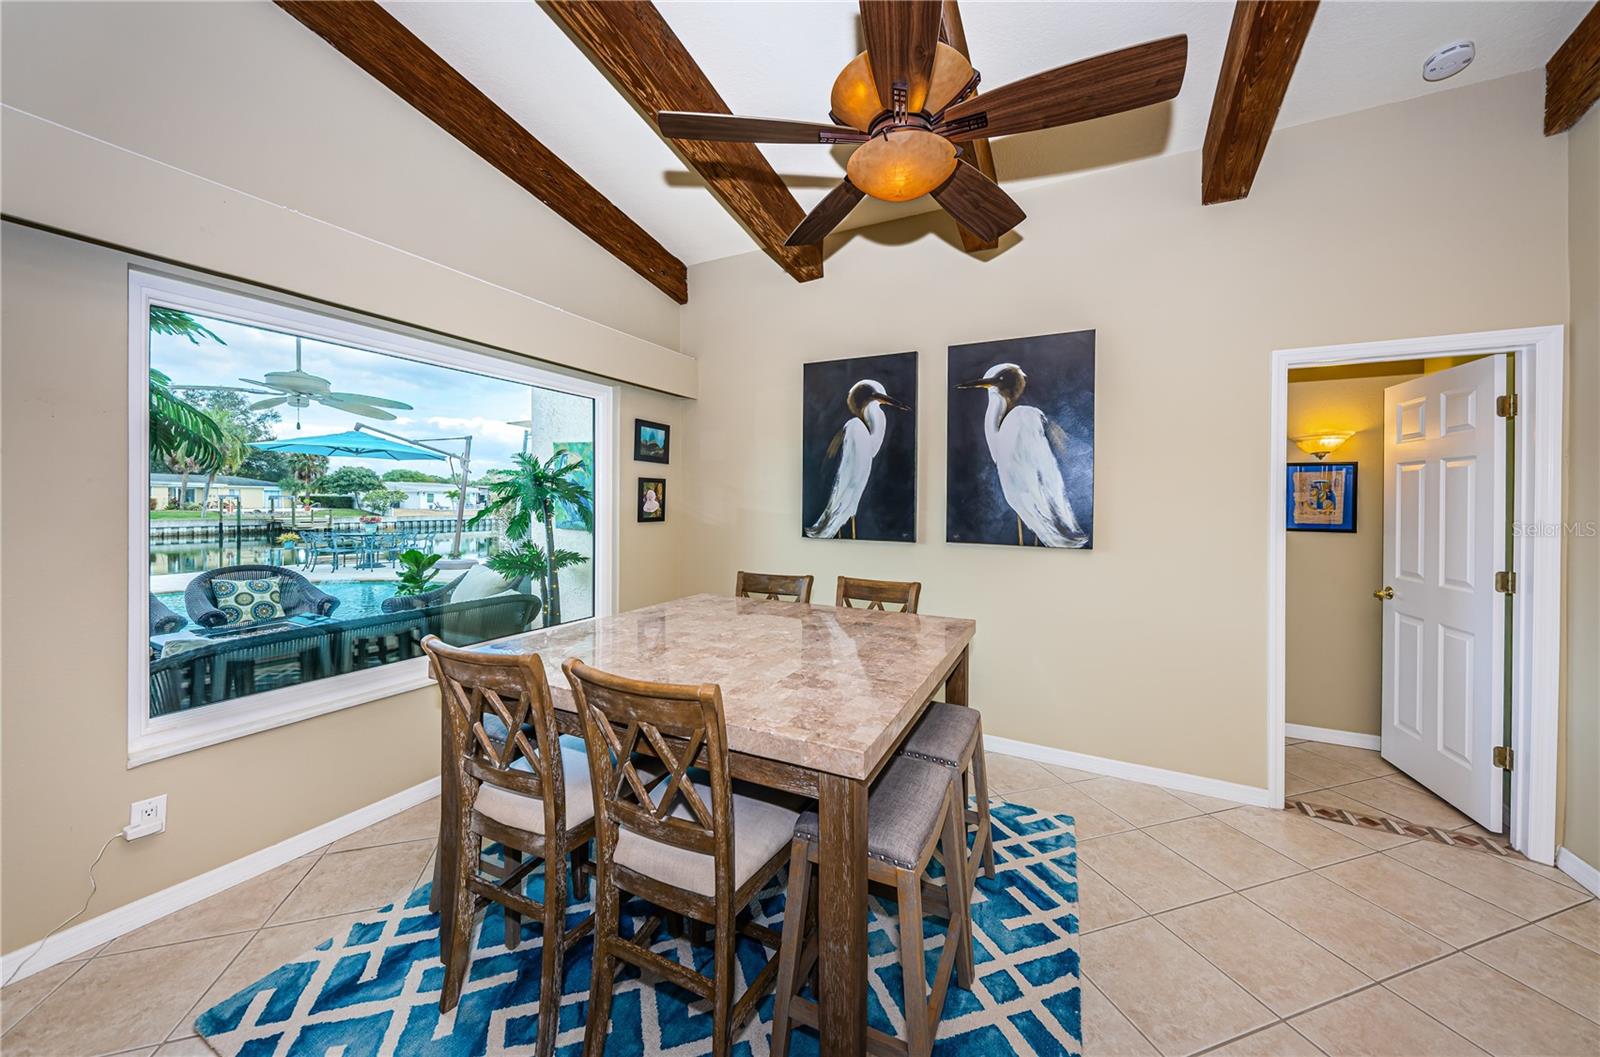 The huge dining room window is impact-resistant and offers safety in hurricanes.